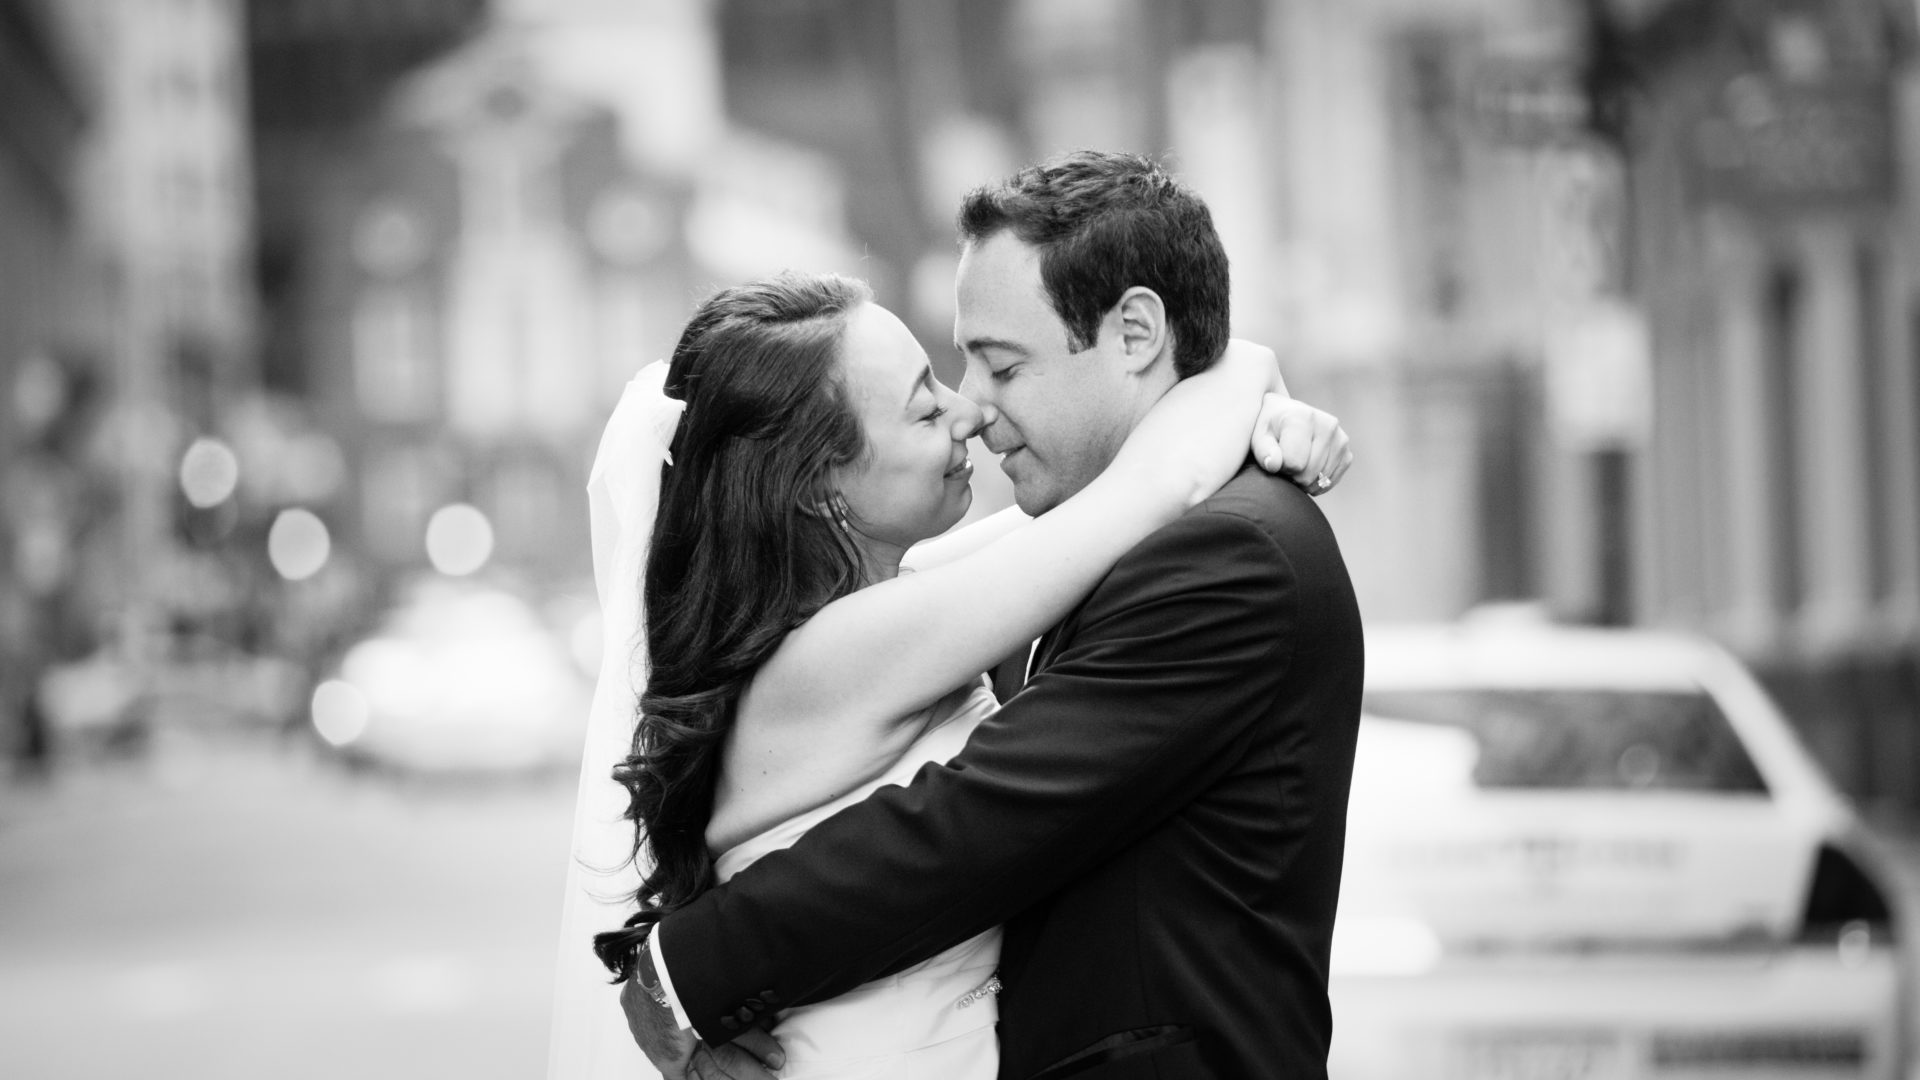 A kiss in the street after their first look